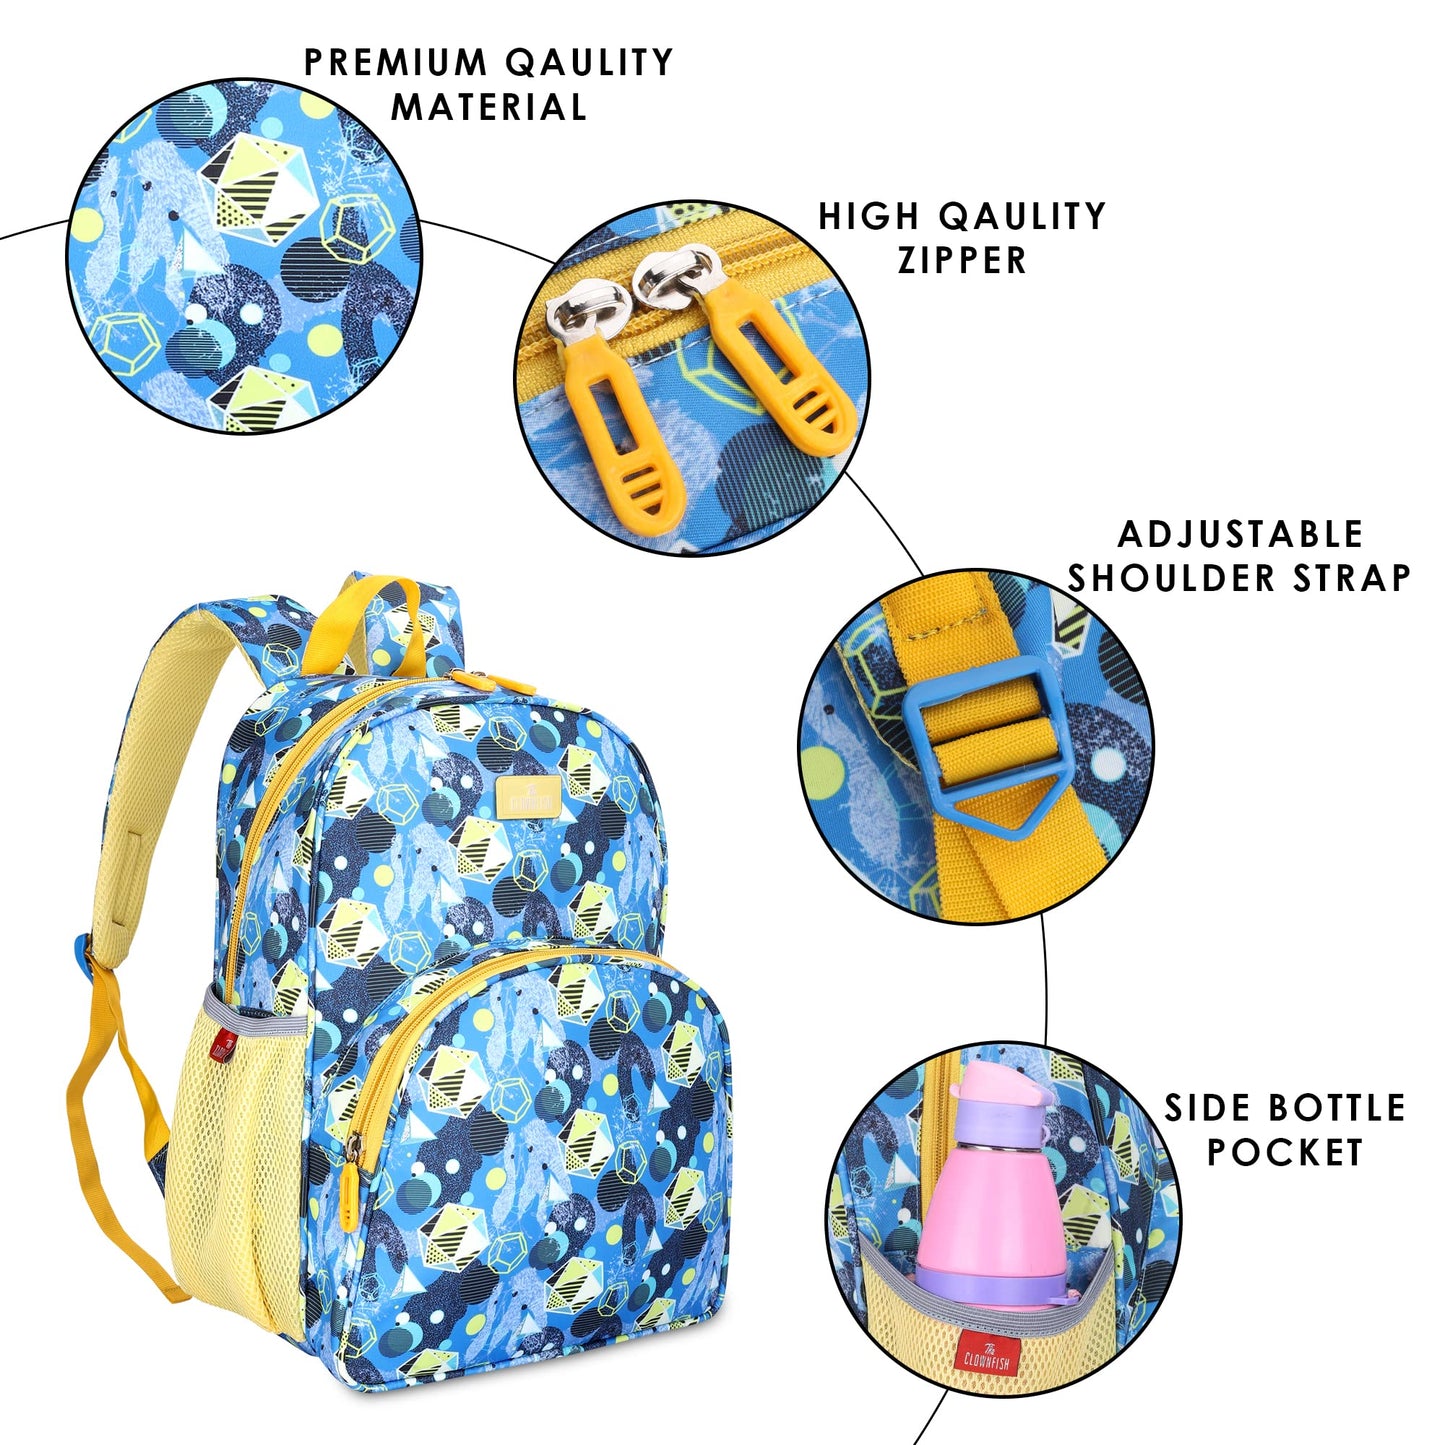 THE CLOWNFISH Cosmic Critters Series Printed Polyester 15 Litres Kids Standard Backpack School Bag With Free Pencil Staionery Pouch Daypack Picnic Bag For Tiny Tots Of Age 5-7 Yrs Light BlueMedium